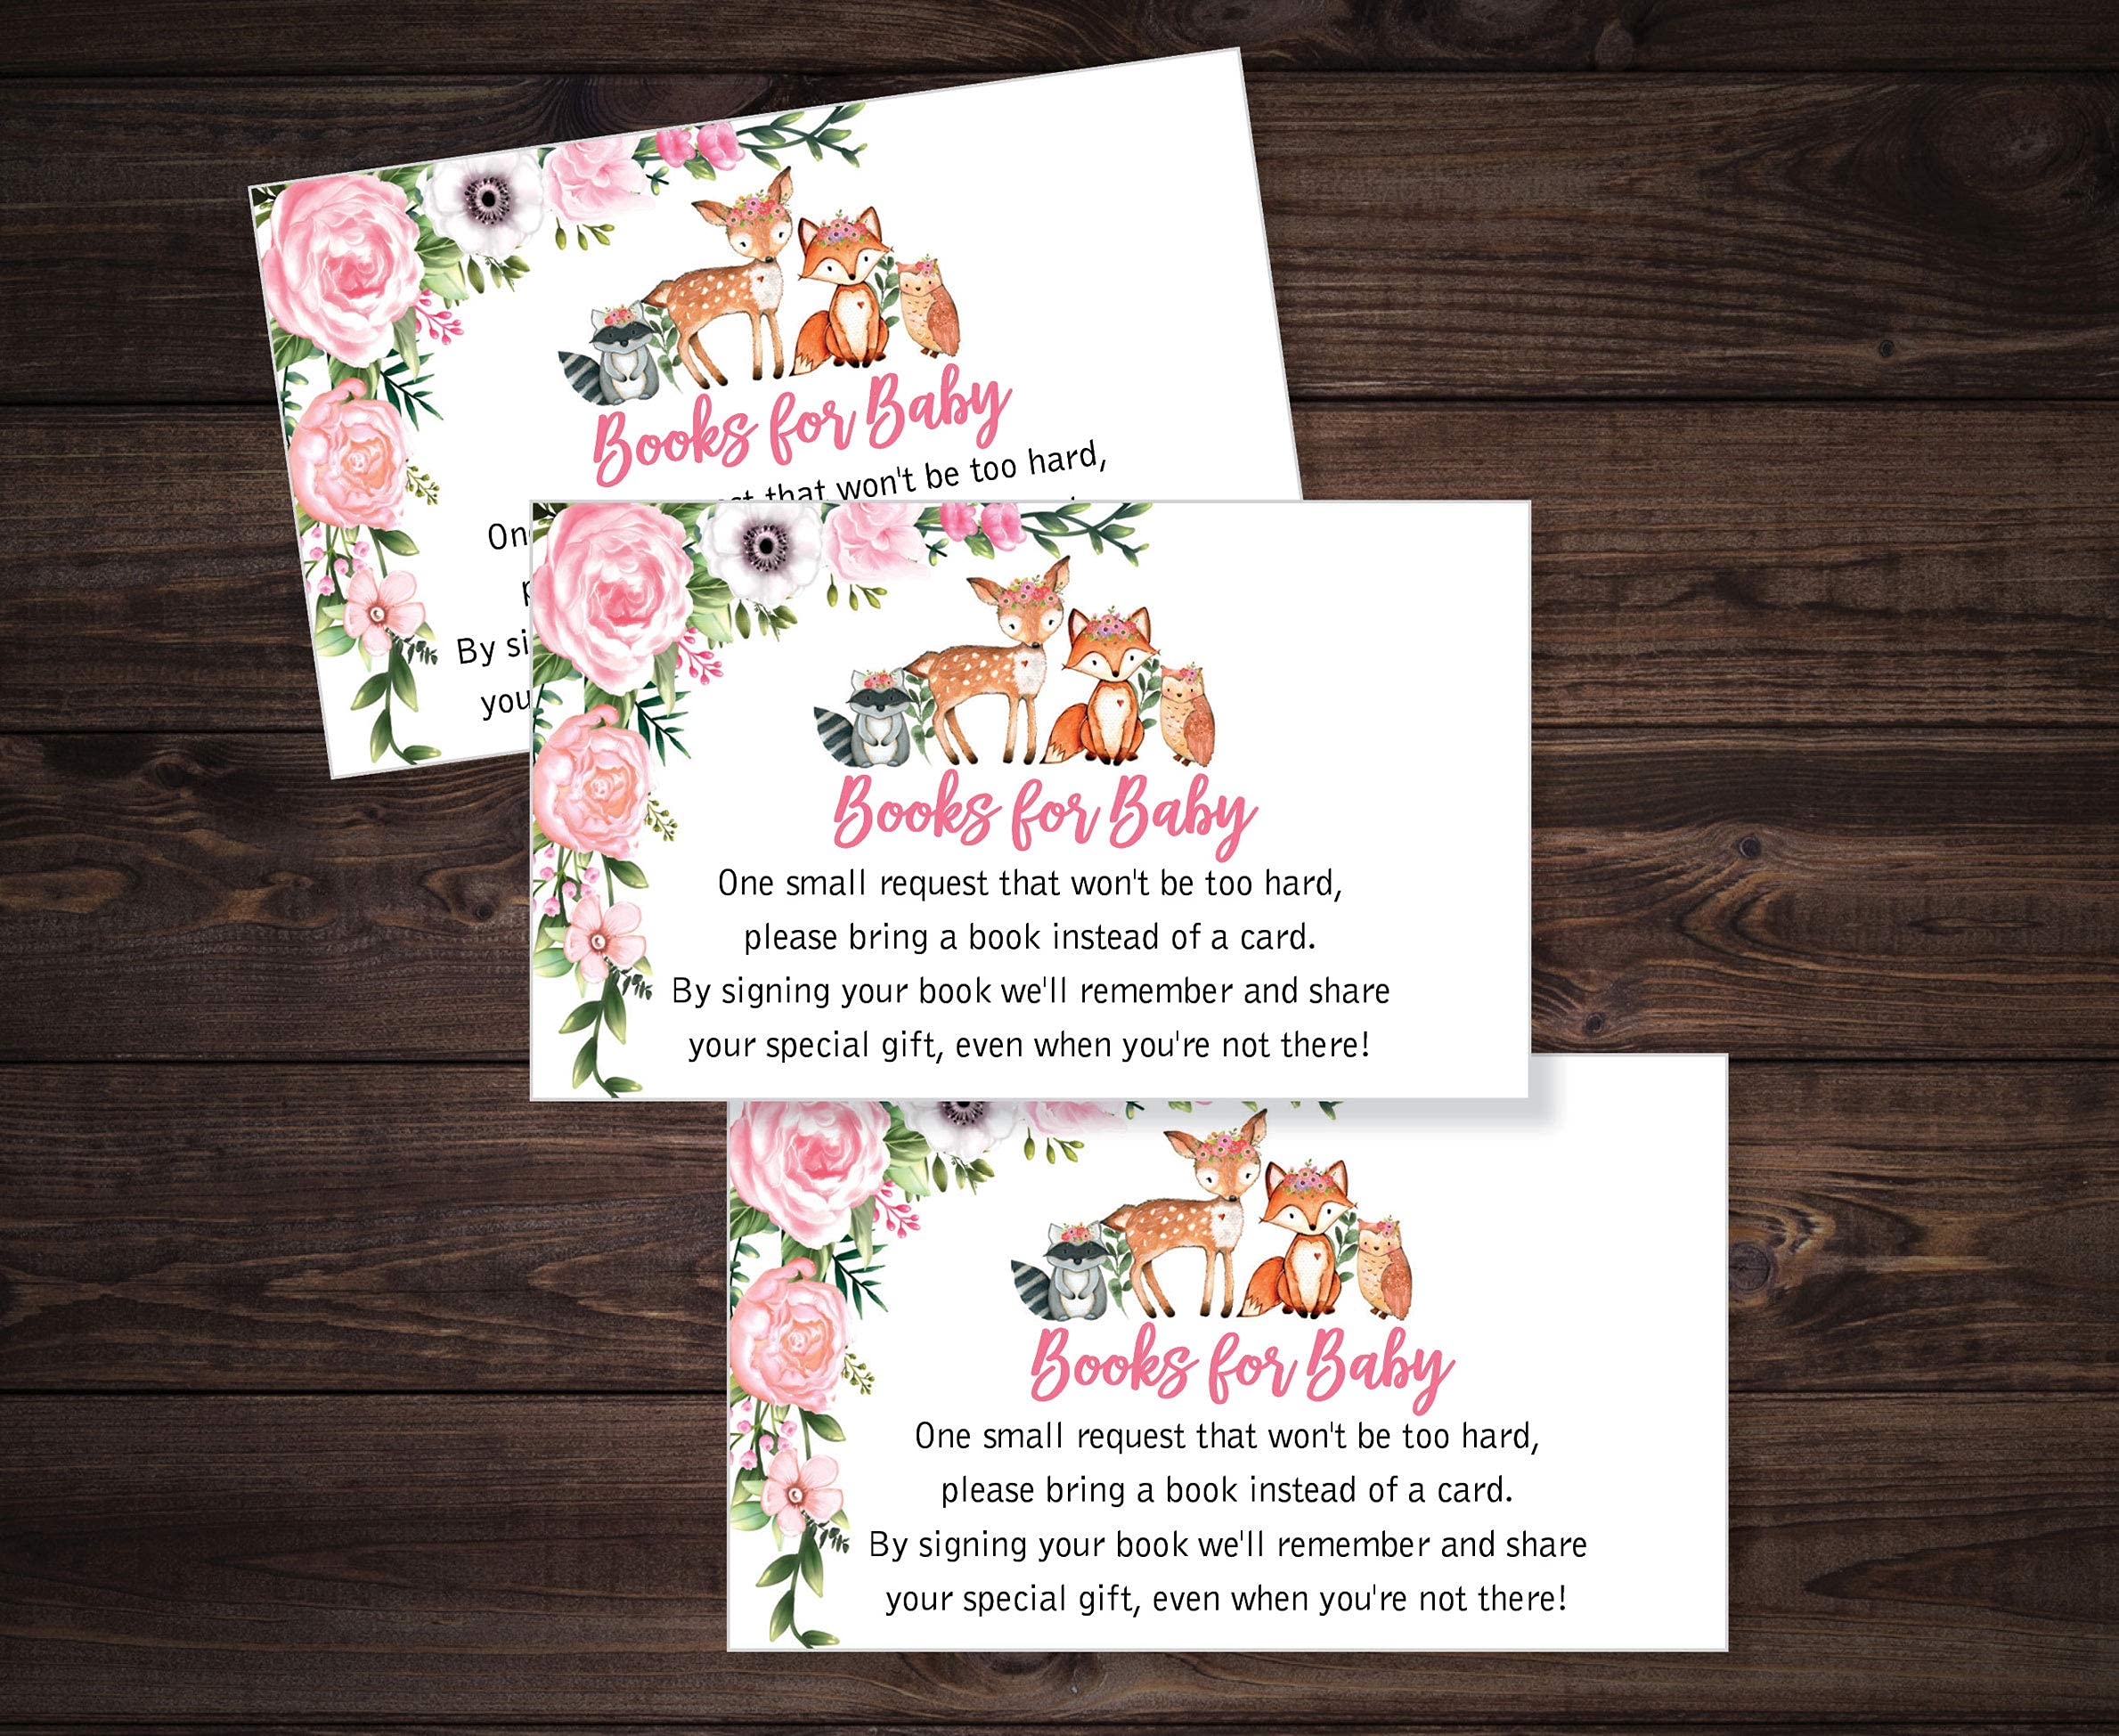 All Ewired Up 25 Girl Woodlands Floral Greenery Baby Shower Invitations (Large Size 5X7 inches) and 50 Pack Watercolor Girl Woodland Greenery Thank You Cards